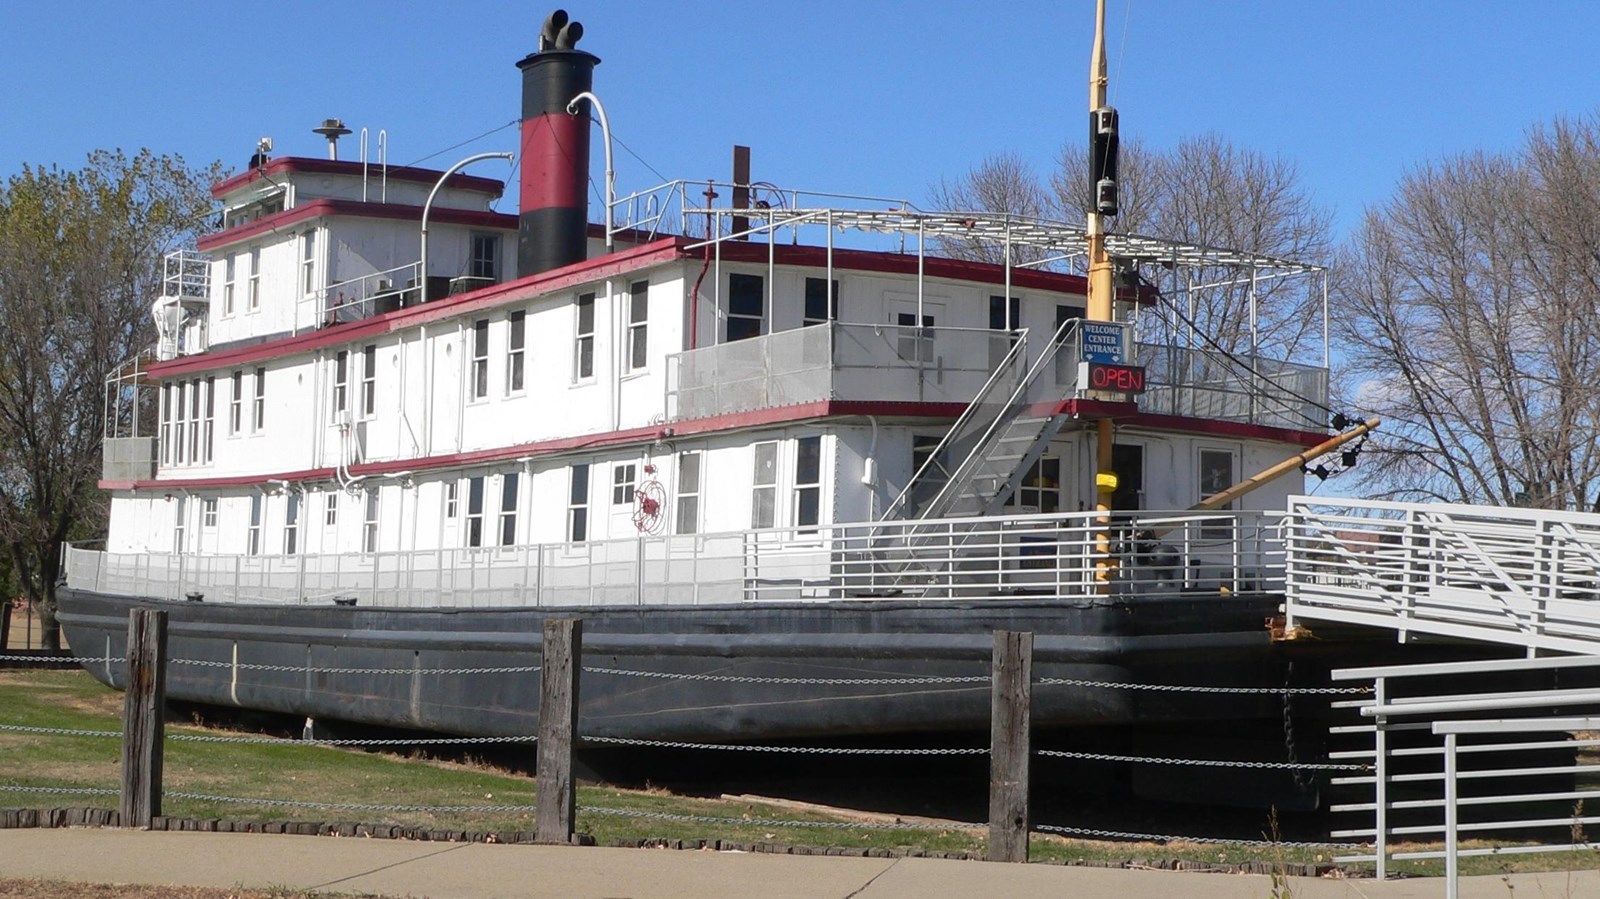 A white tow boat in front of a fence. A red and black smokestack rises from the upper deck.